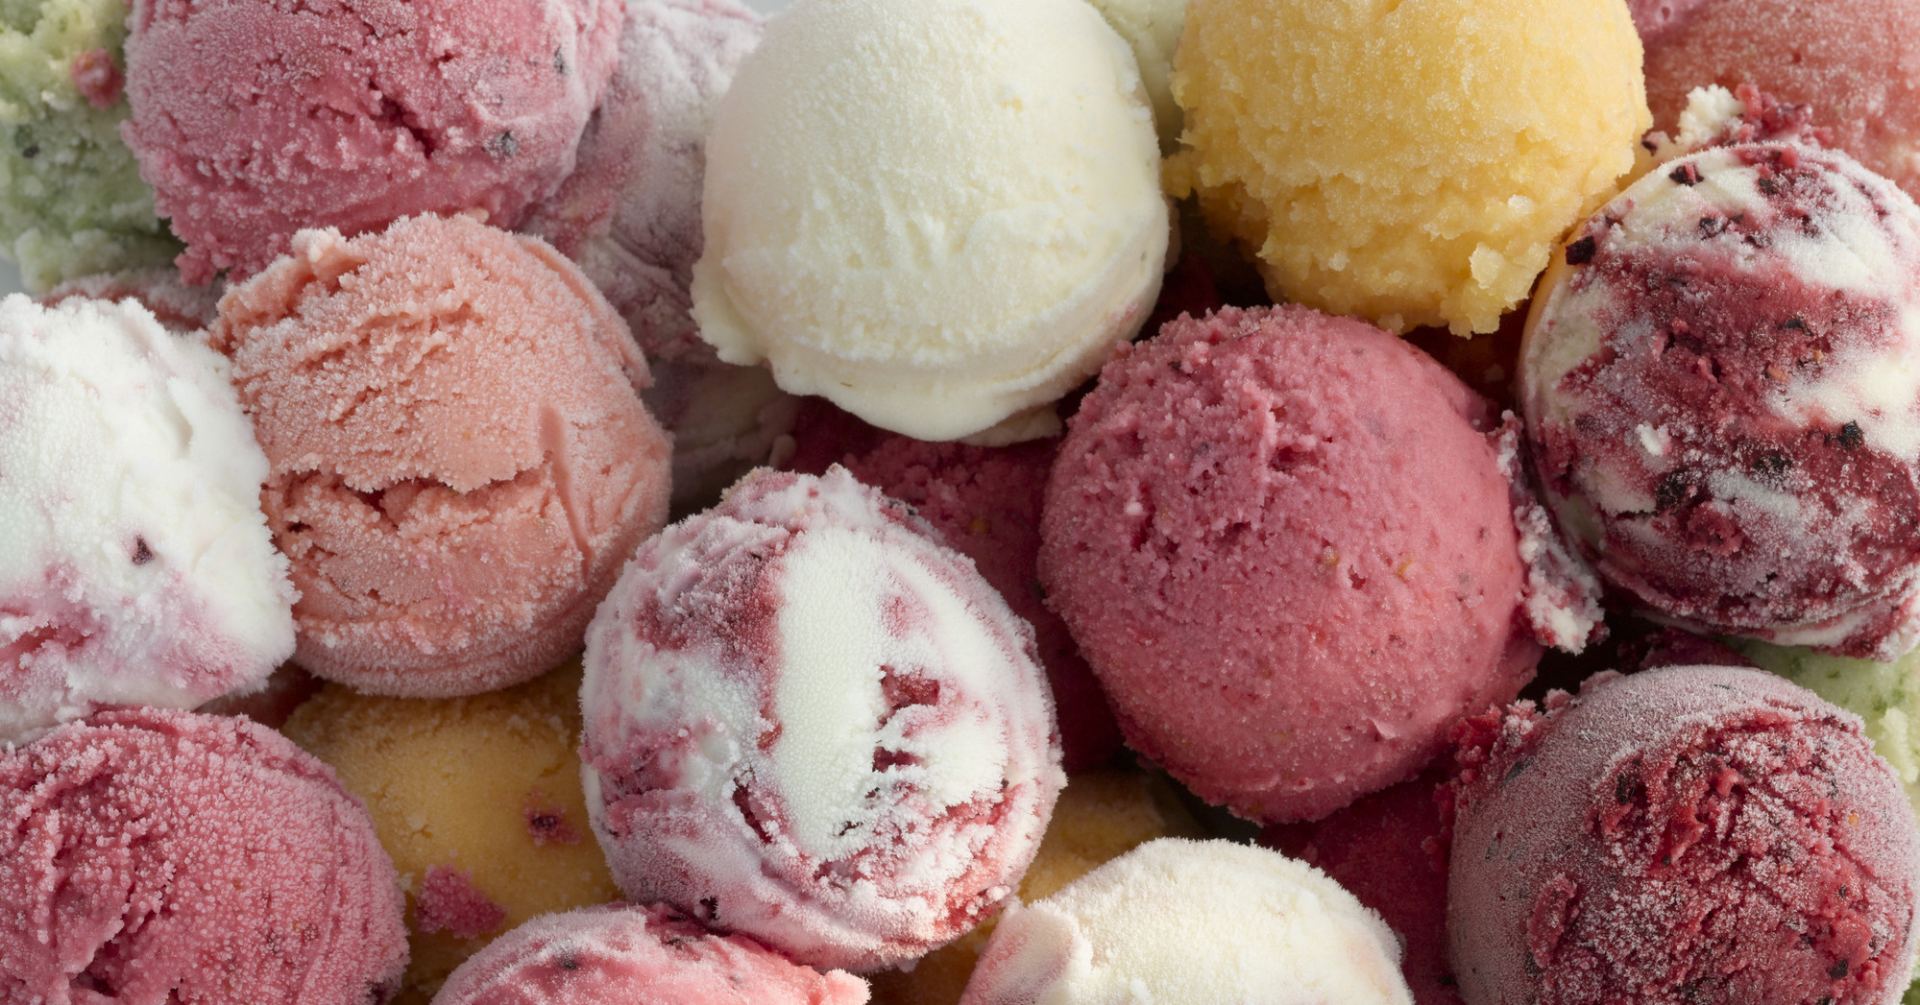 Volume of ice cream exports from Russian region to Azerbaijan disclosed